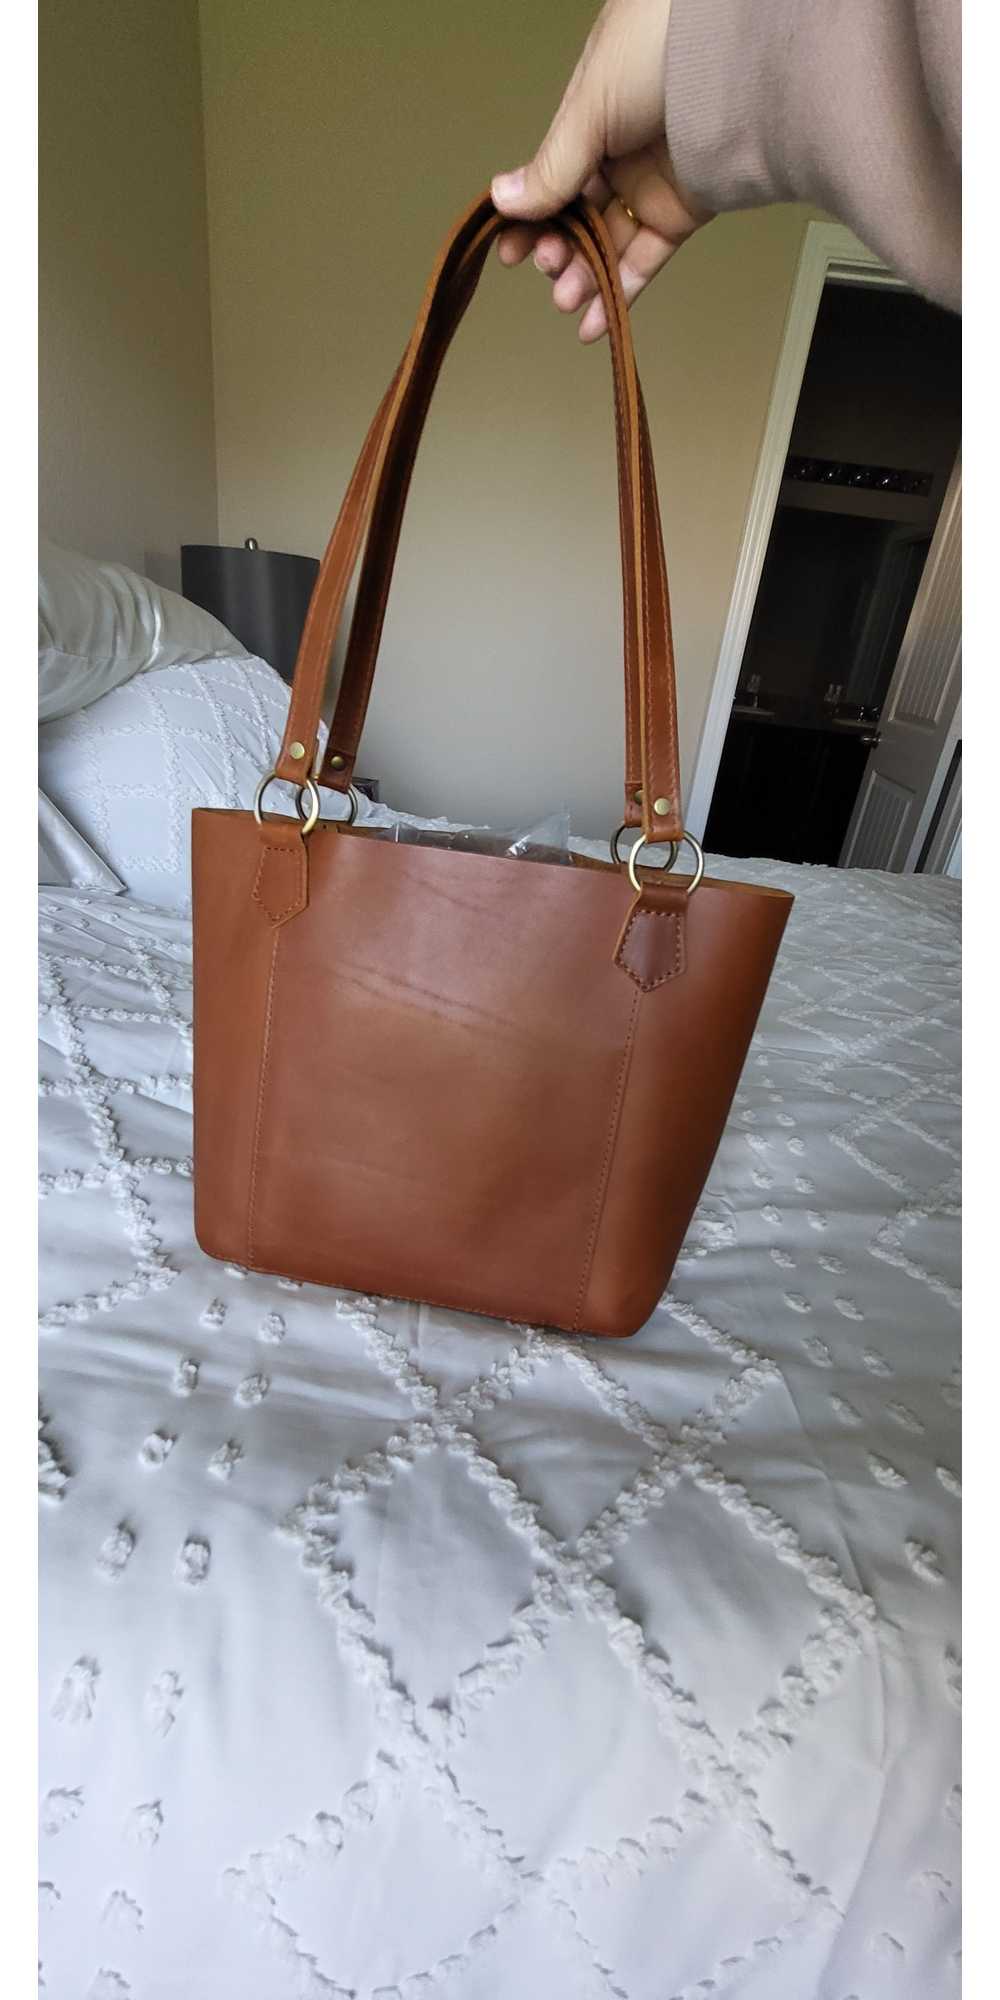 Portland Leather 'Almost Perfect' The Market Tote - image 5